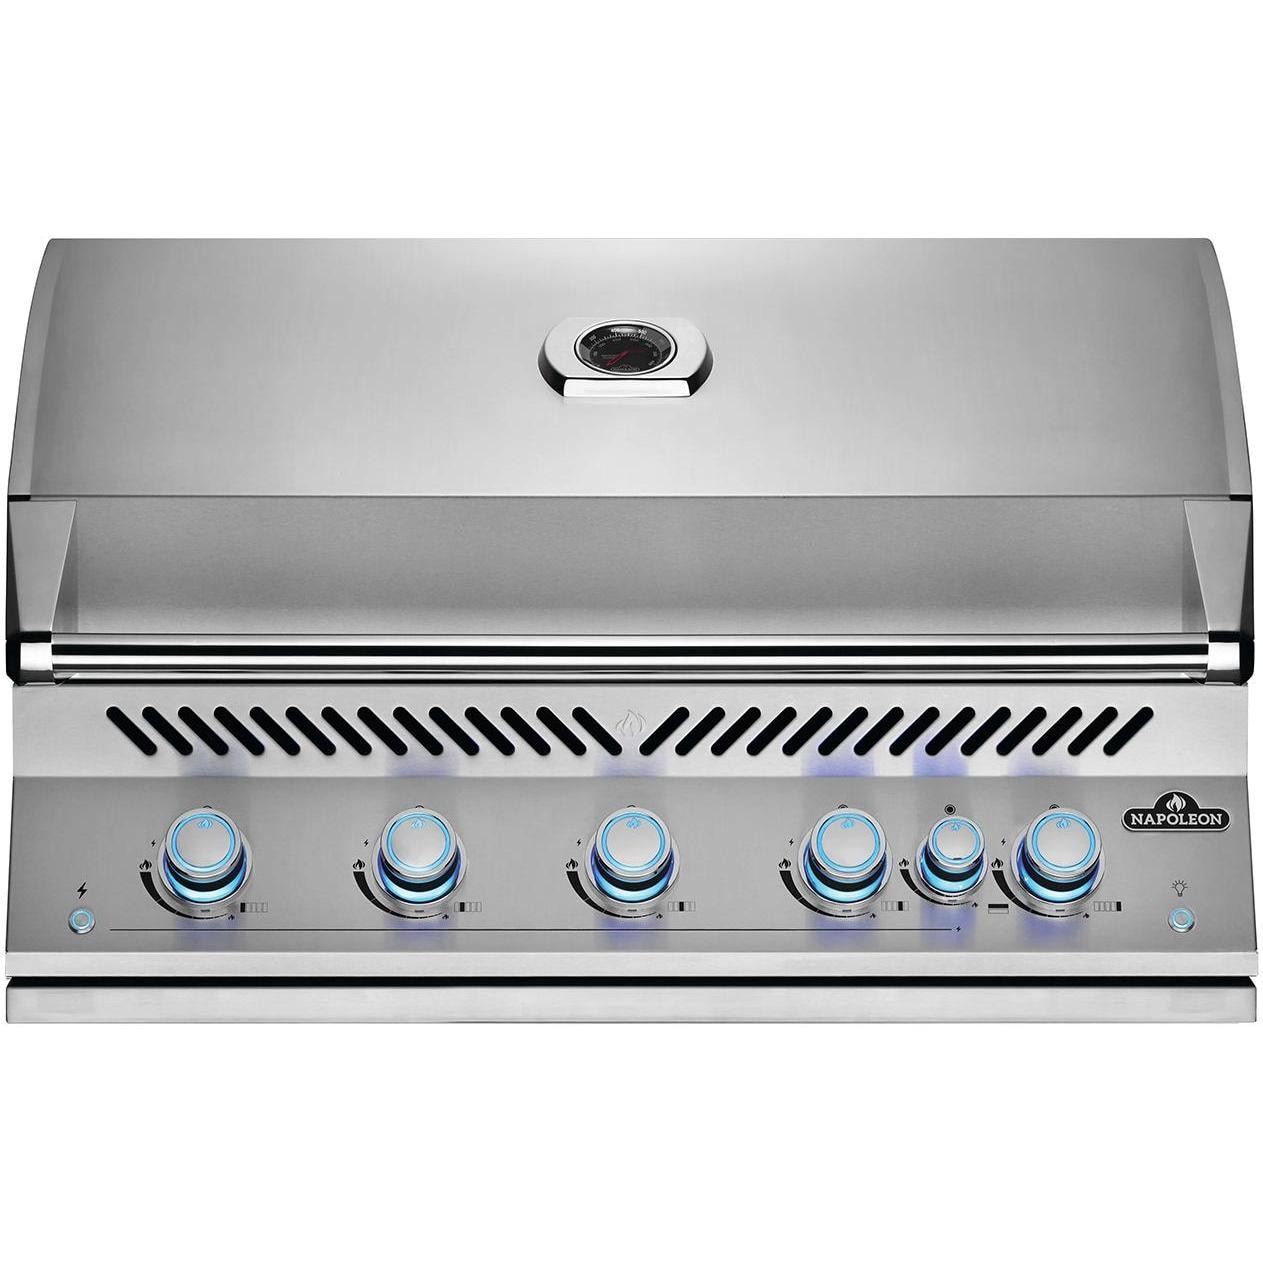 Napoleon Built-In 700 Series 38-Inch Propane Gas Grill w/ Infrared Rear Burner & Rotisserie Kit - BIG38RBPSS - image 1 of 6